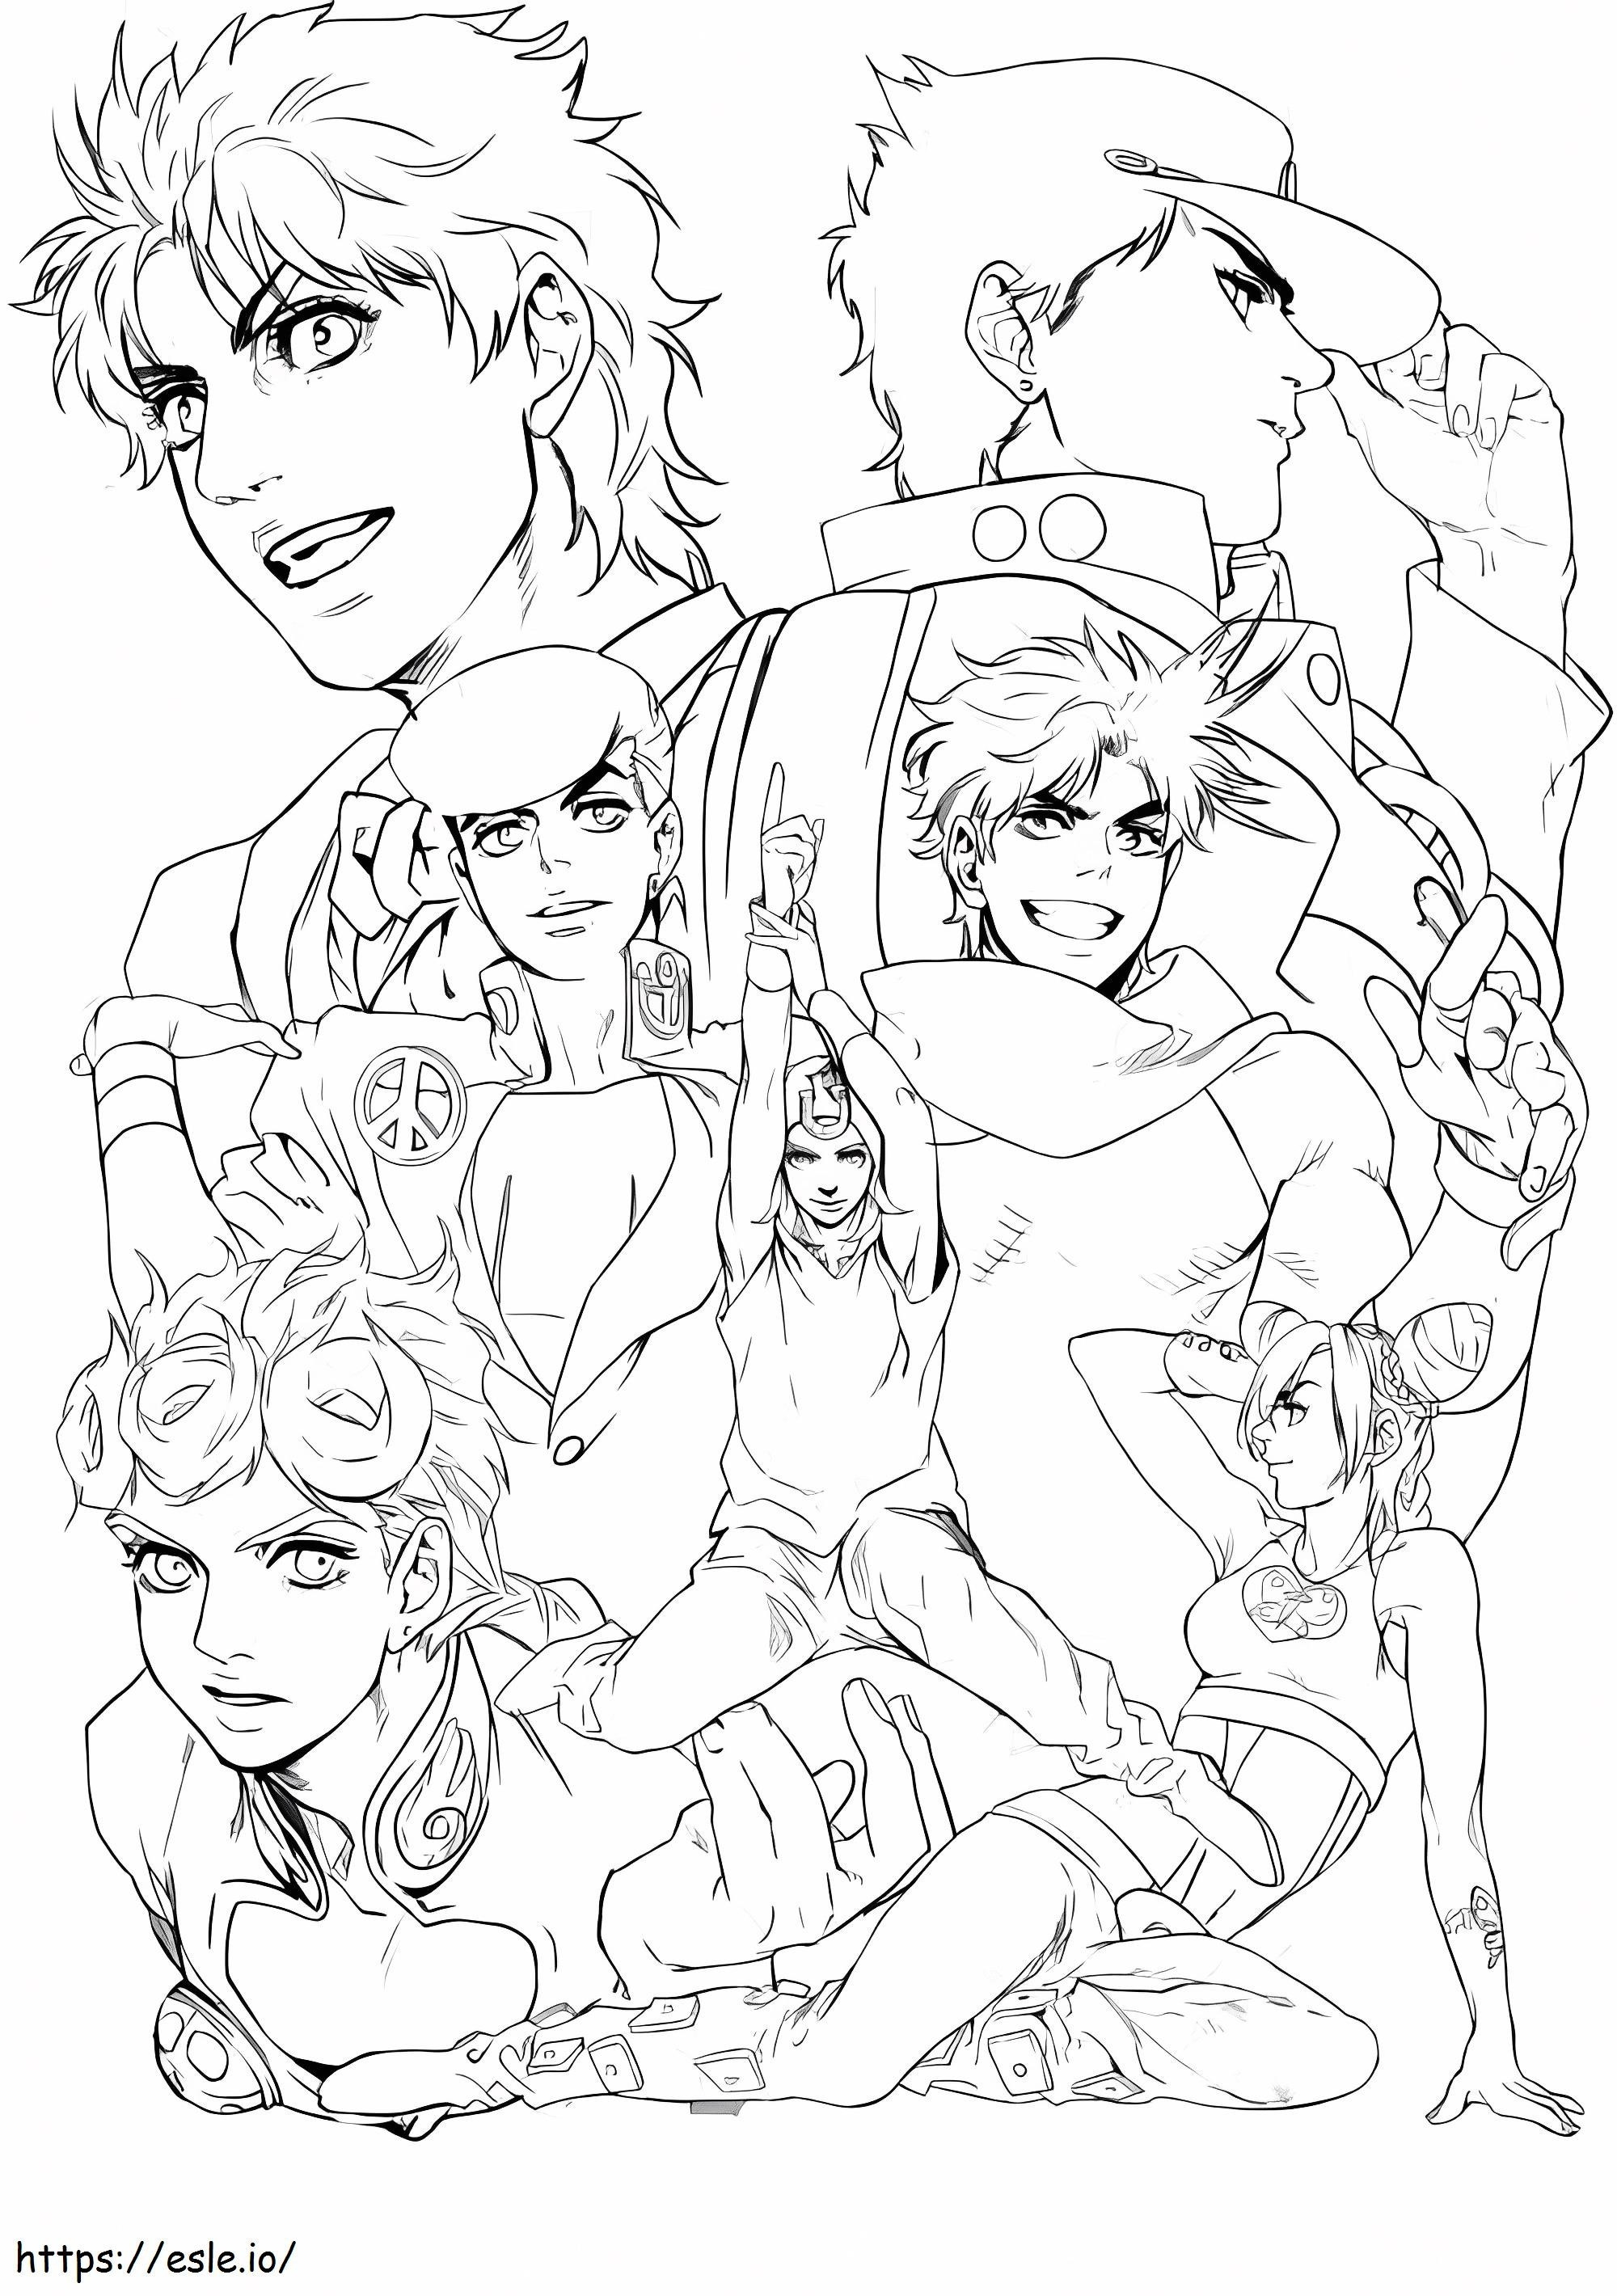 Characters From Jojos Bizarre Adventure coloring page